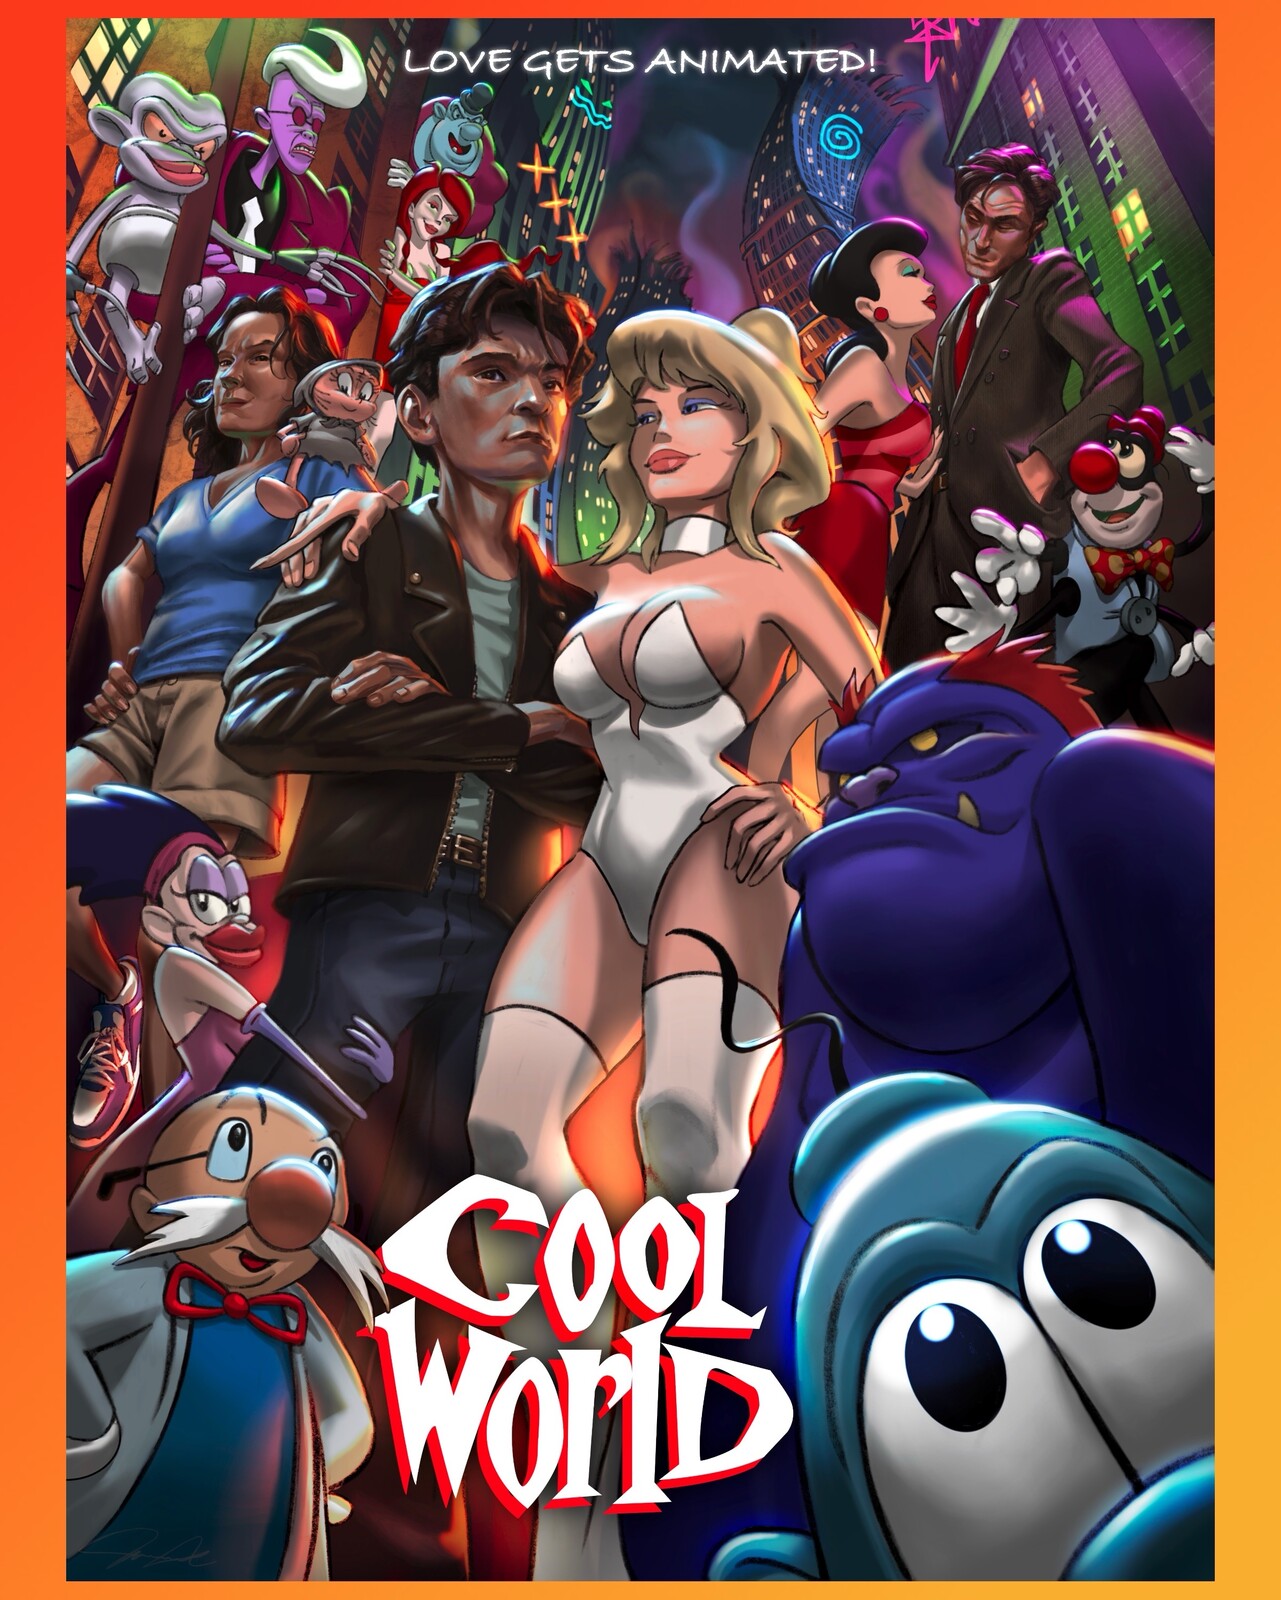 COOL WORLD (Re-Imagined)